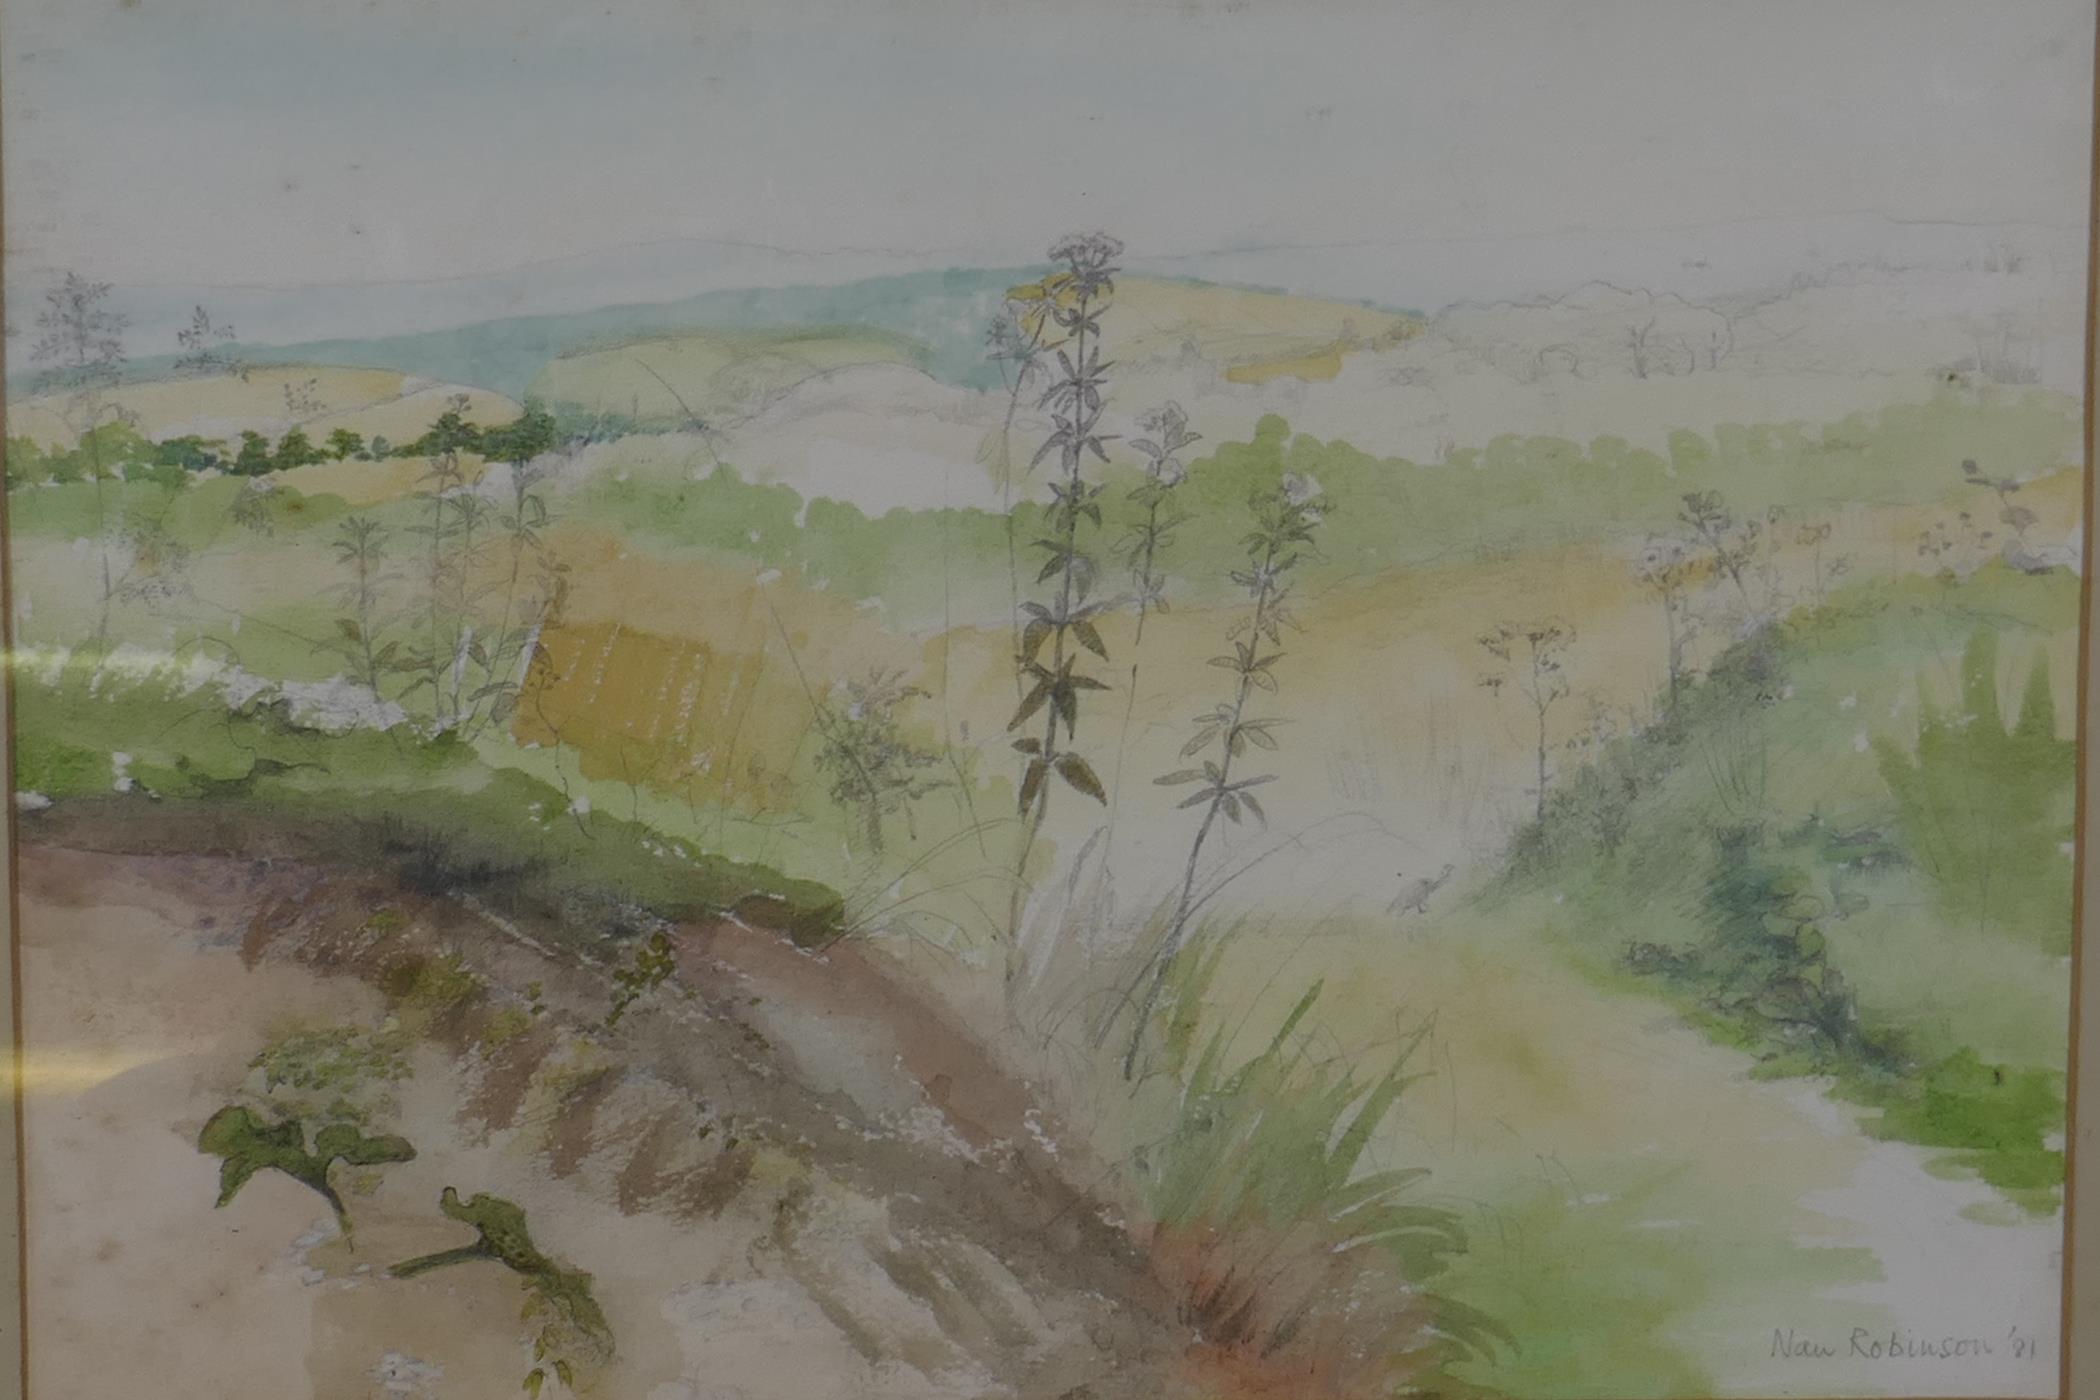 Nan Robinson, Goodwood landscape, signed and dated (19)81, watercolour, 38 x 26cm